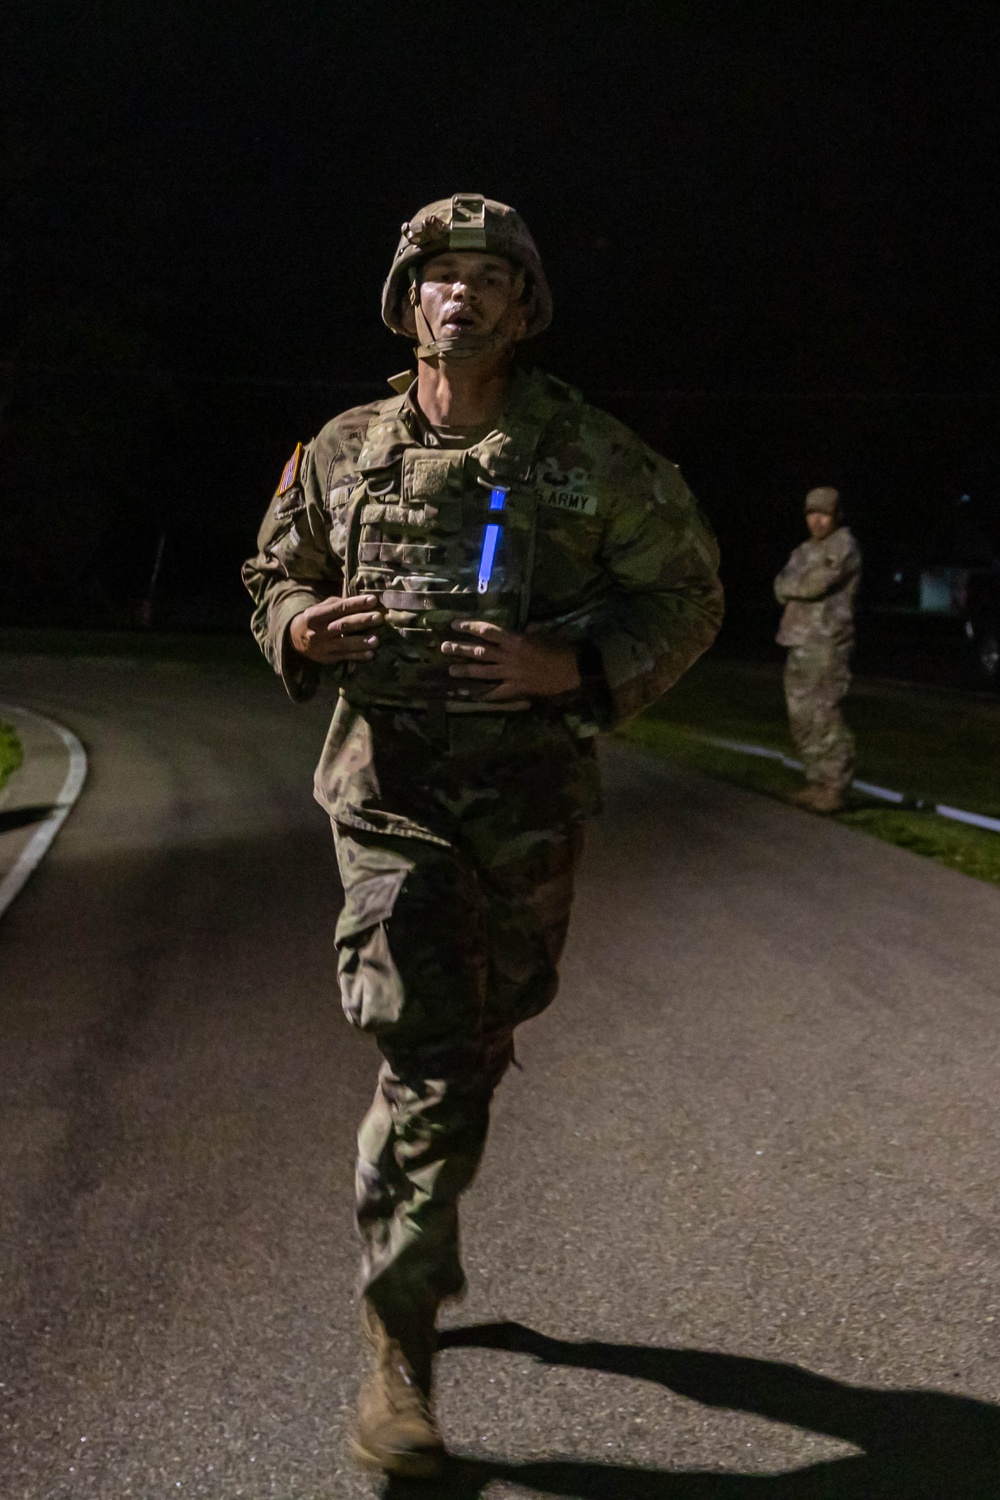 An Expert Soldier Badge candidate finishes the expert physical fitness assessment